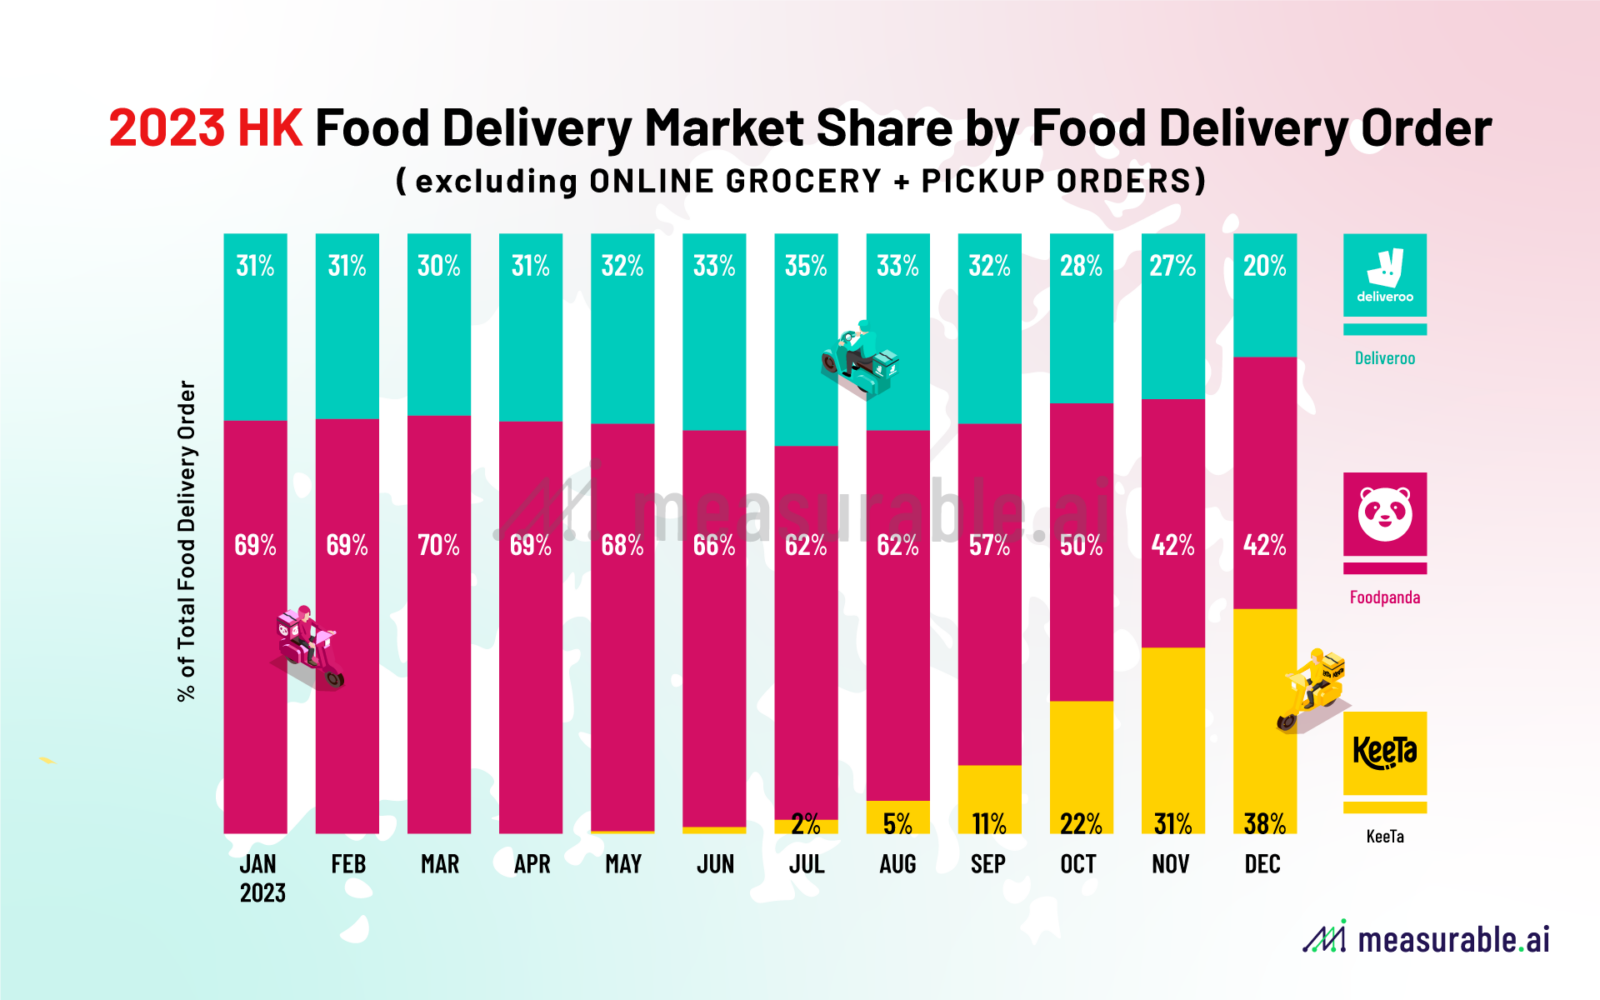 2023 HK Food Delivery Market Share by Food Delivery Order